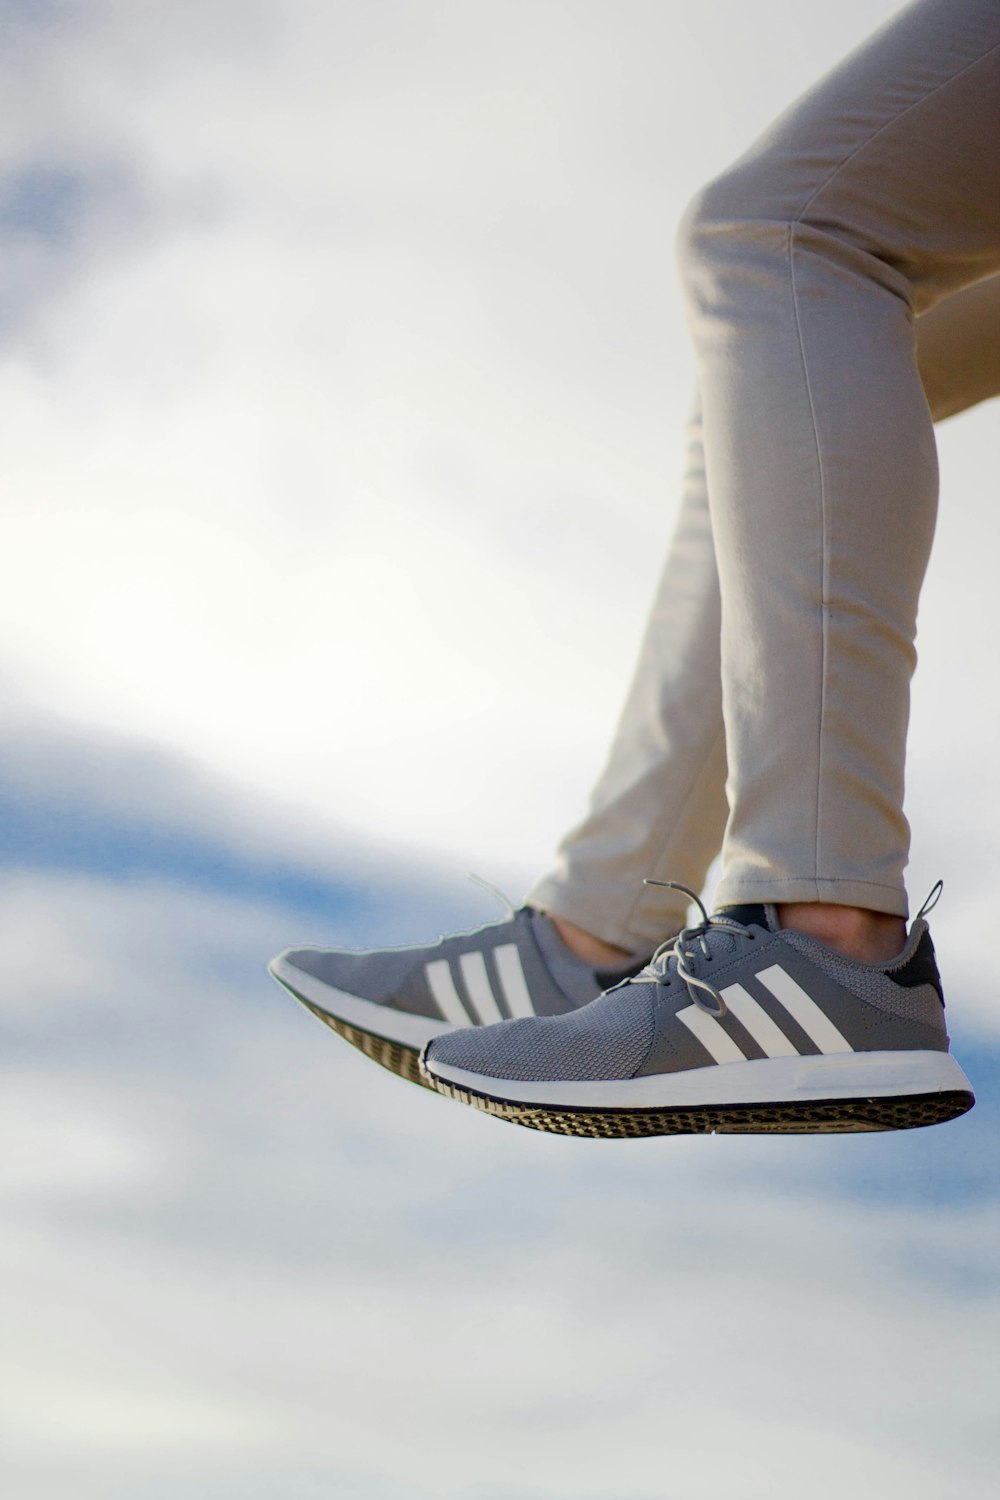 person wearing gray adidas low-top sneakers photo – Free Henley beach Image  on Unsplash